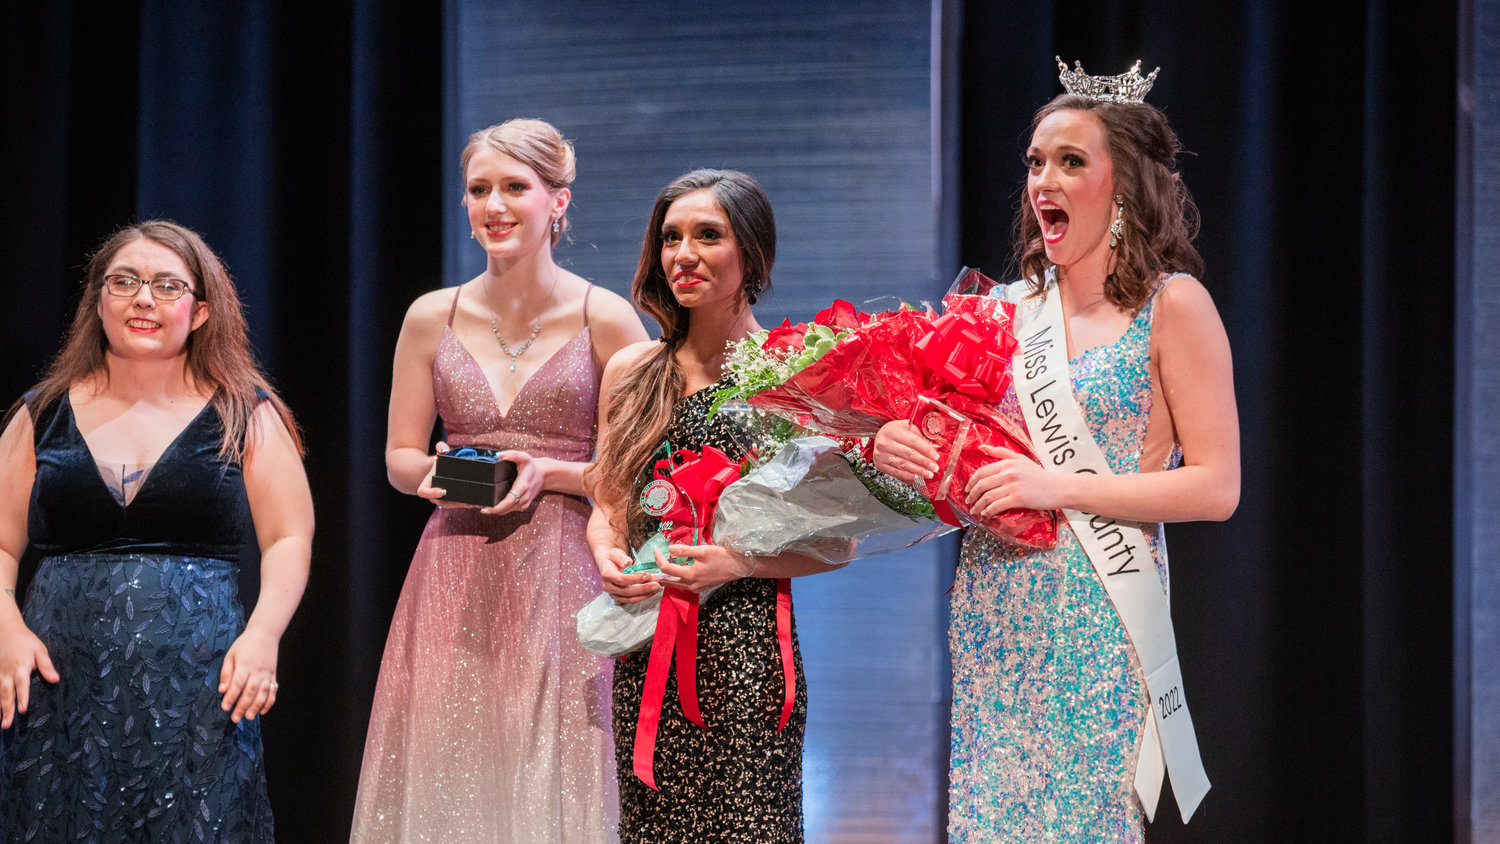 Briana Rasku reacts to being crowned Miss Lewis County during an event held at Centralia High School Saturday night.